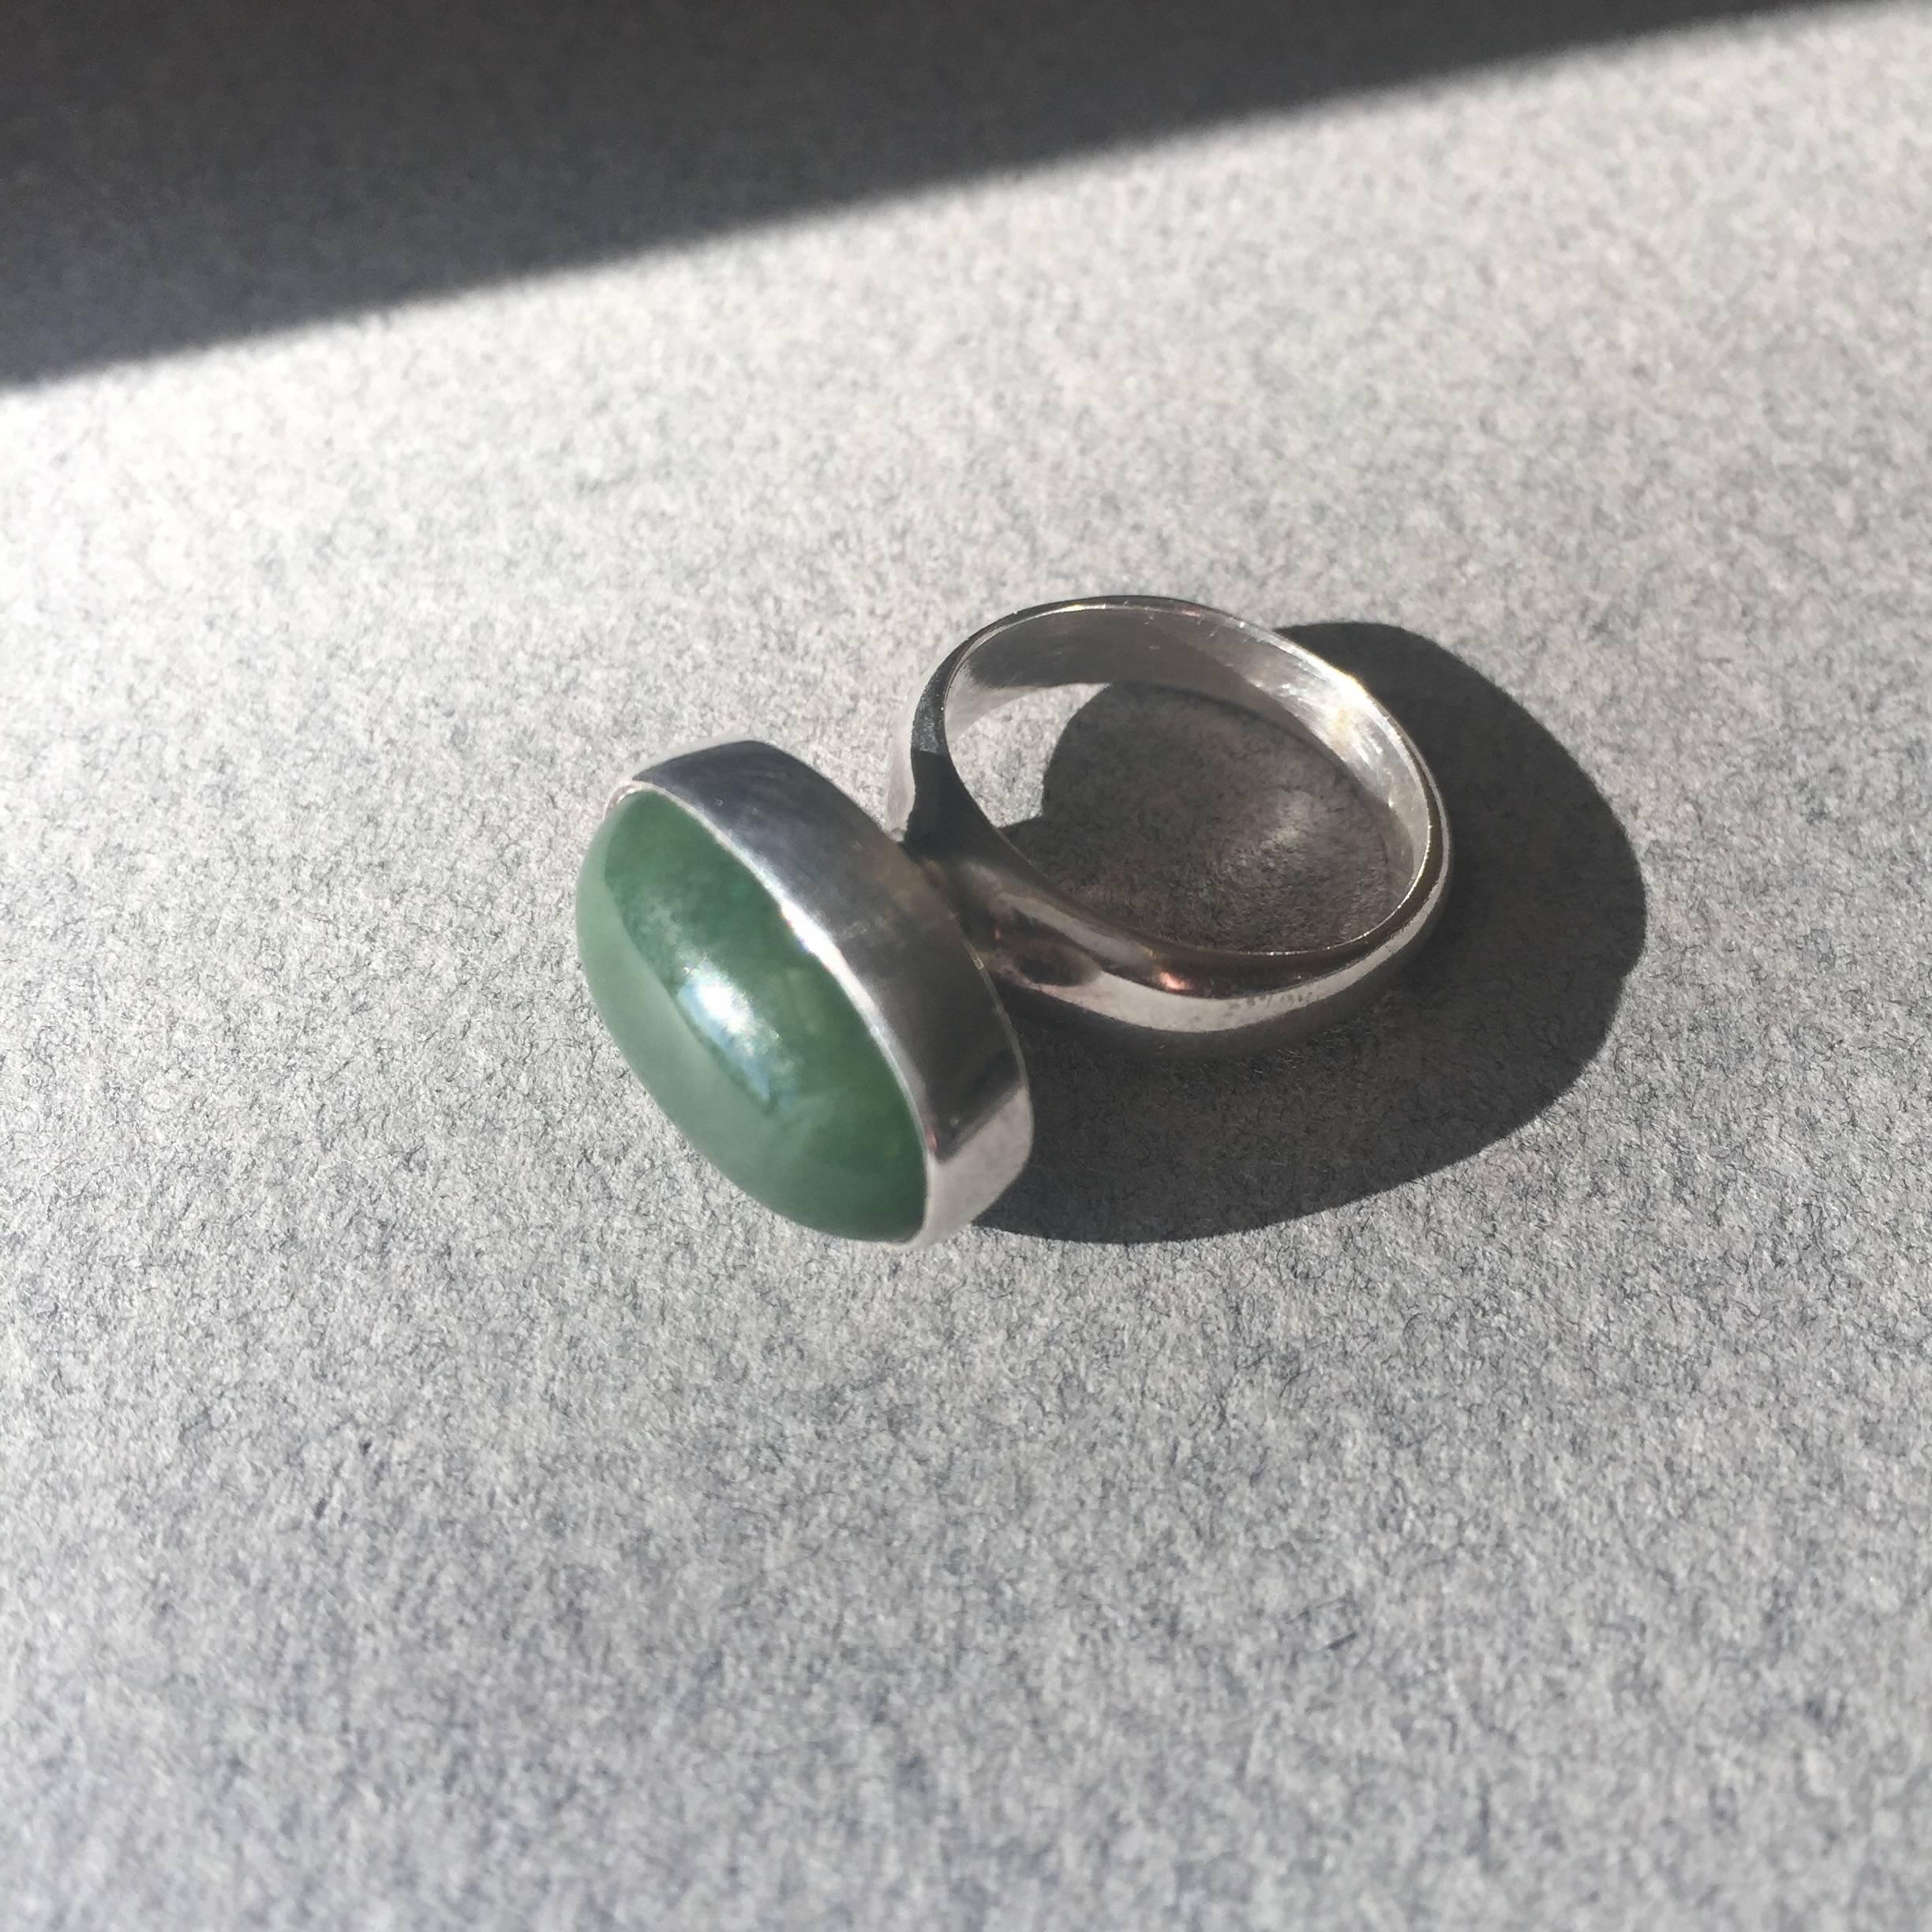 Georg Jensen Sterling Silver Ring No. 123B by Nanna Ditzel with Natural Jade Cabochon Stone.

Sleek modernist design.  Size 5.75

Complimentary gift box and FREE shipping included.

About the designer:
Nanna Ditzel (1923-2005) Denmark’s most